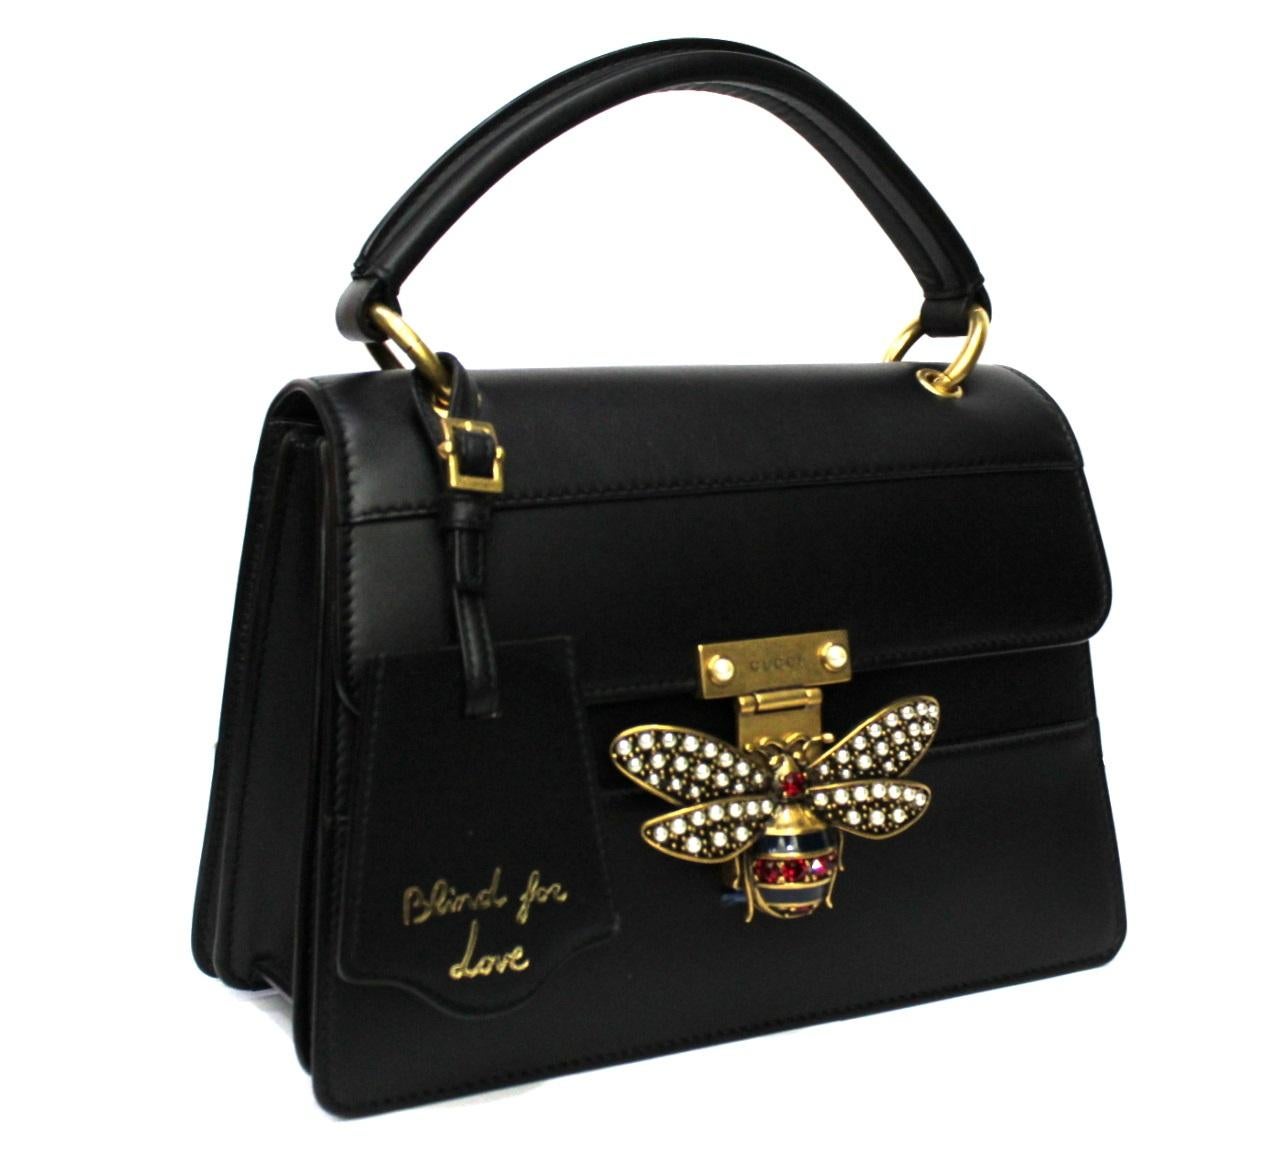 Gucci Queen Margaret in black leather.

Leather handle with fabric and leather shoulder strap.

Gilded hardware, internally capacious.

The bag is in excellent condition.